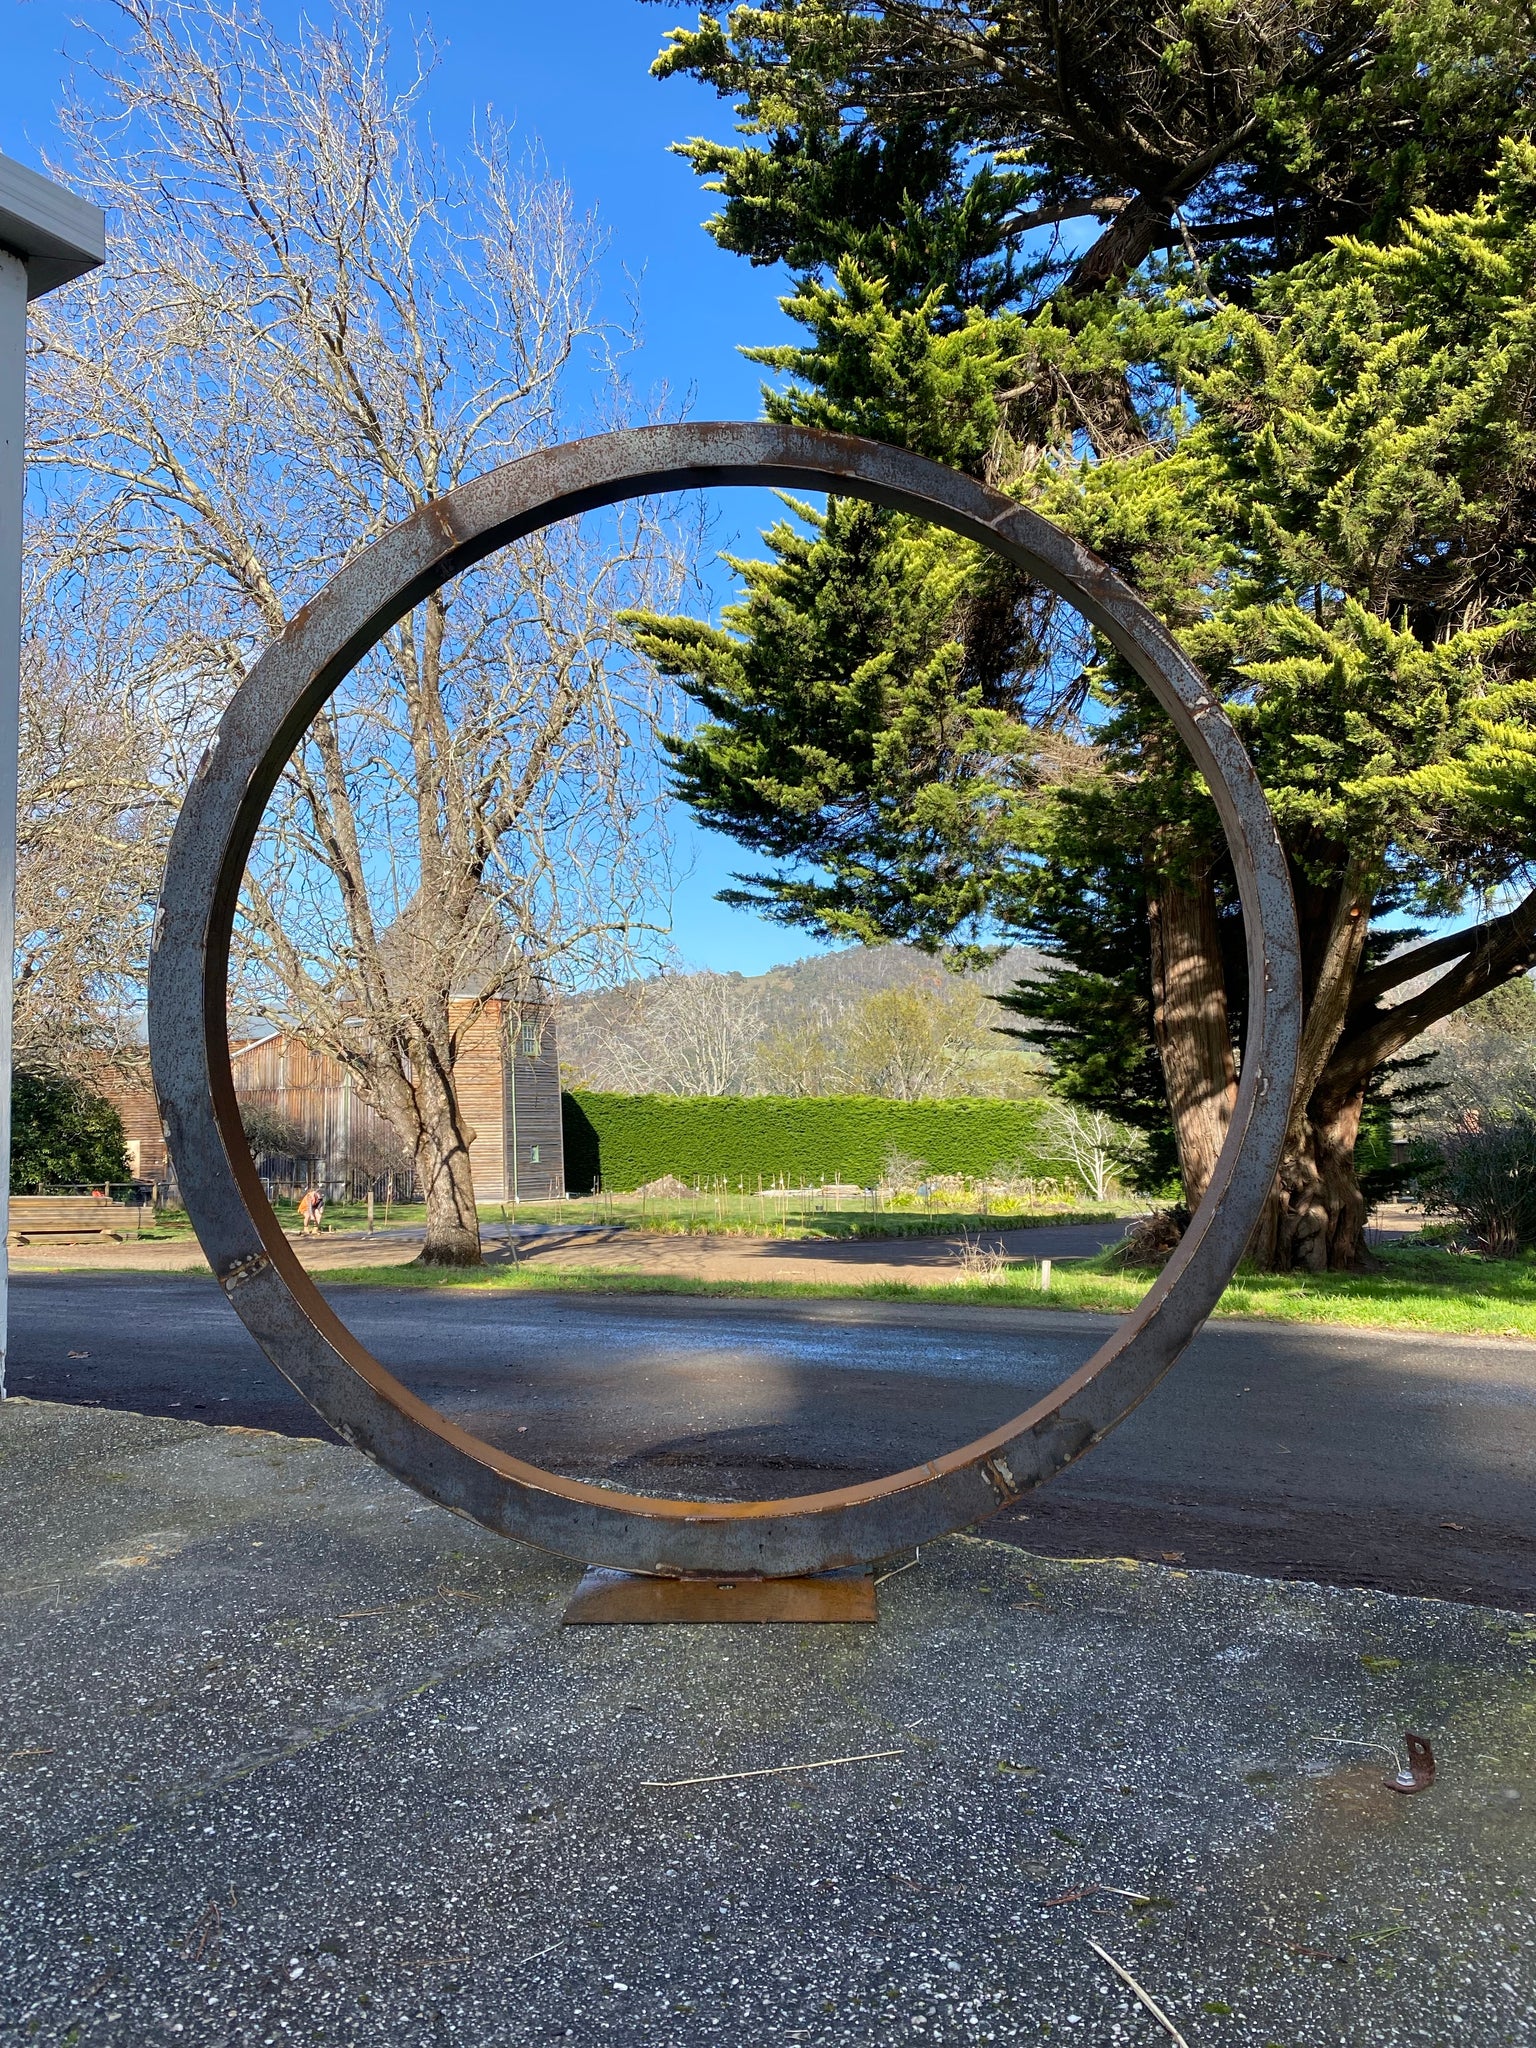 Sculpture “Give Me a Ring”